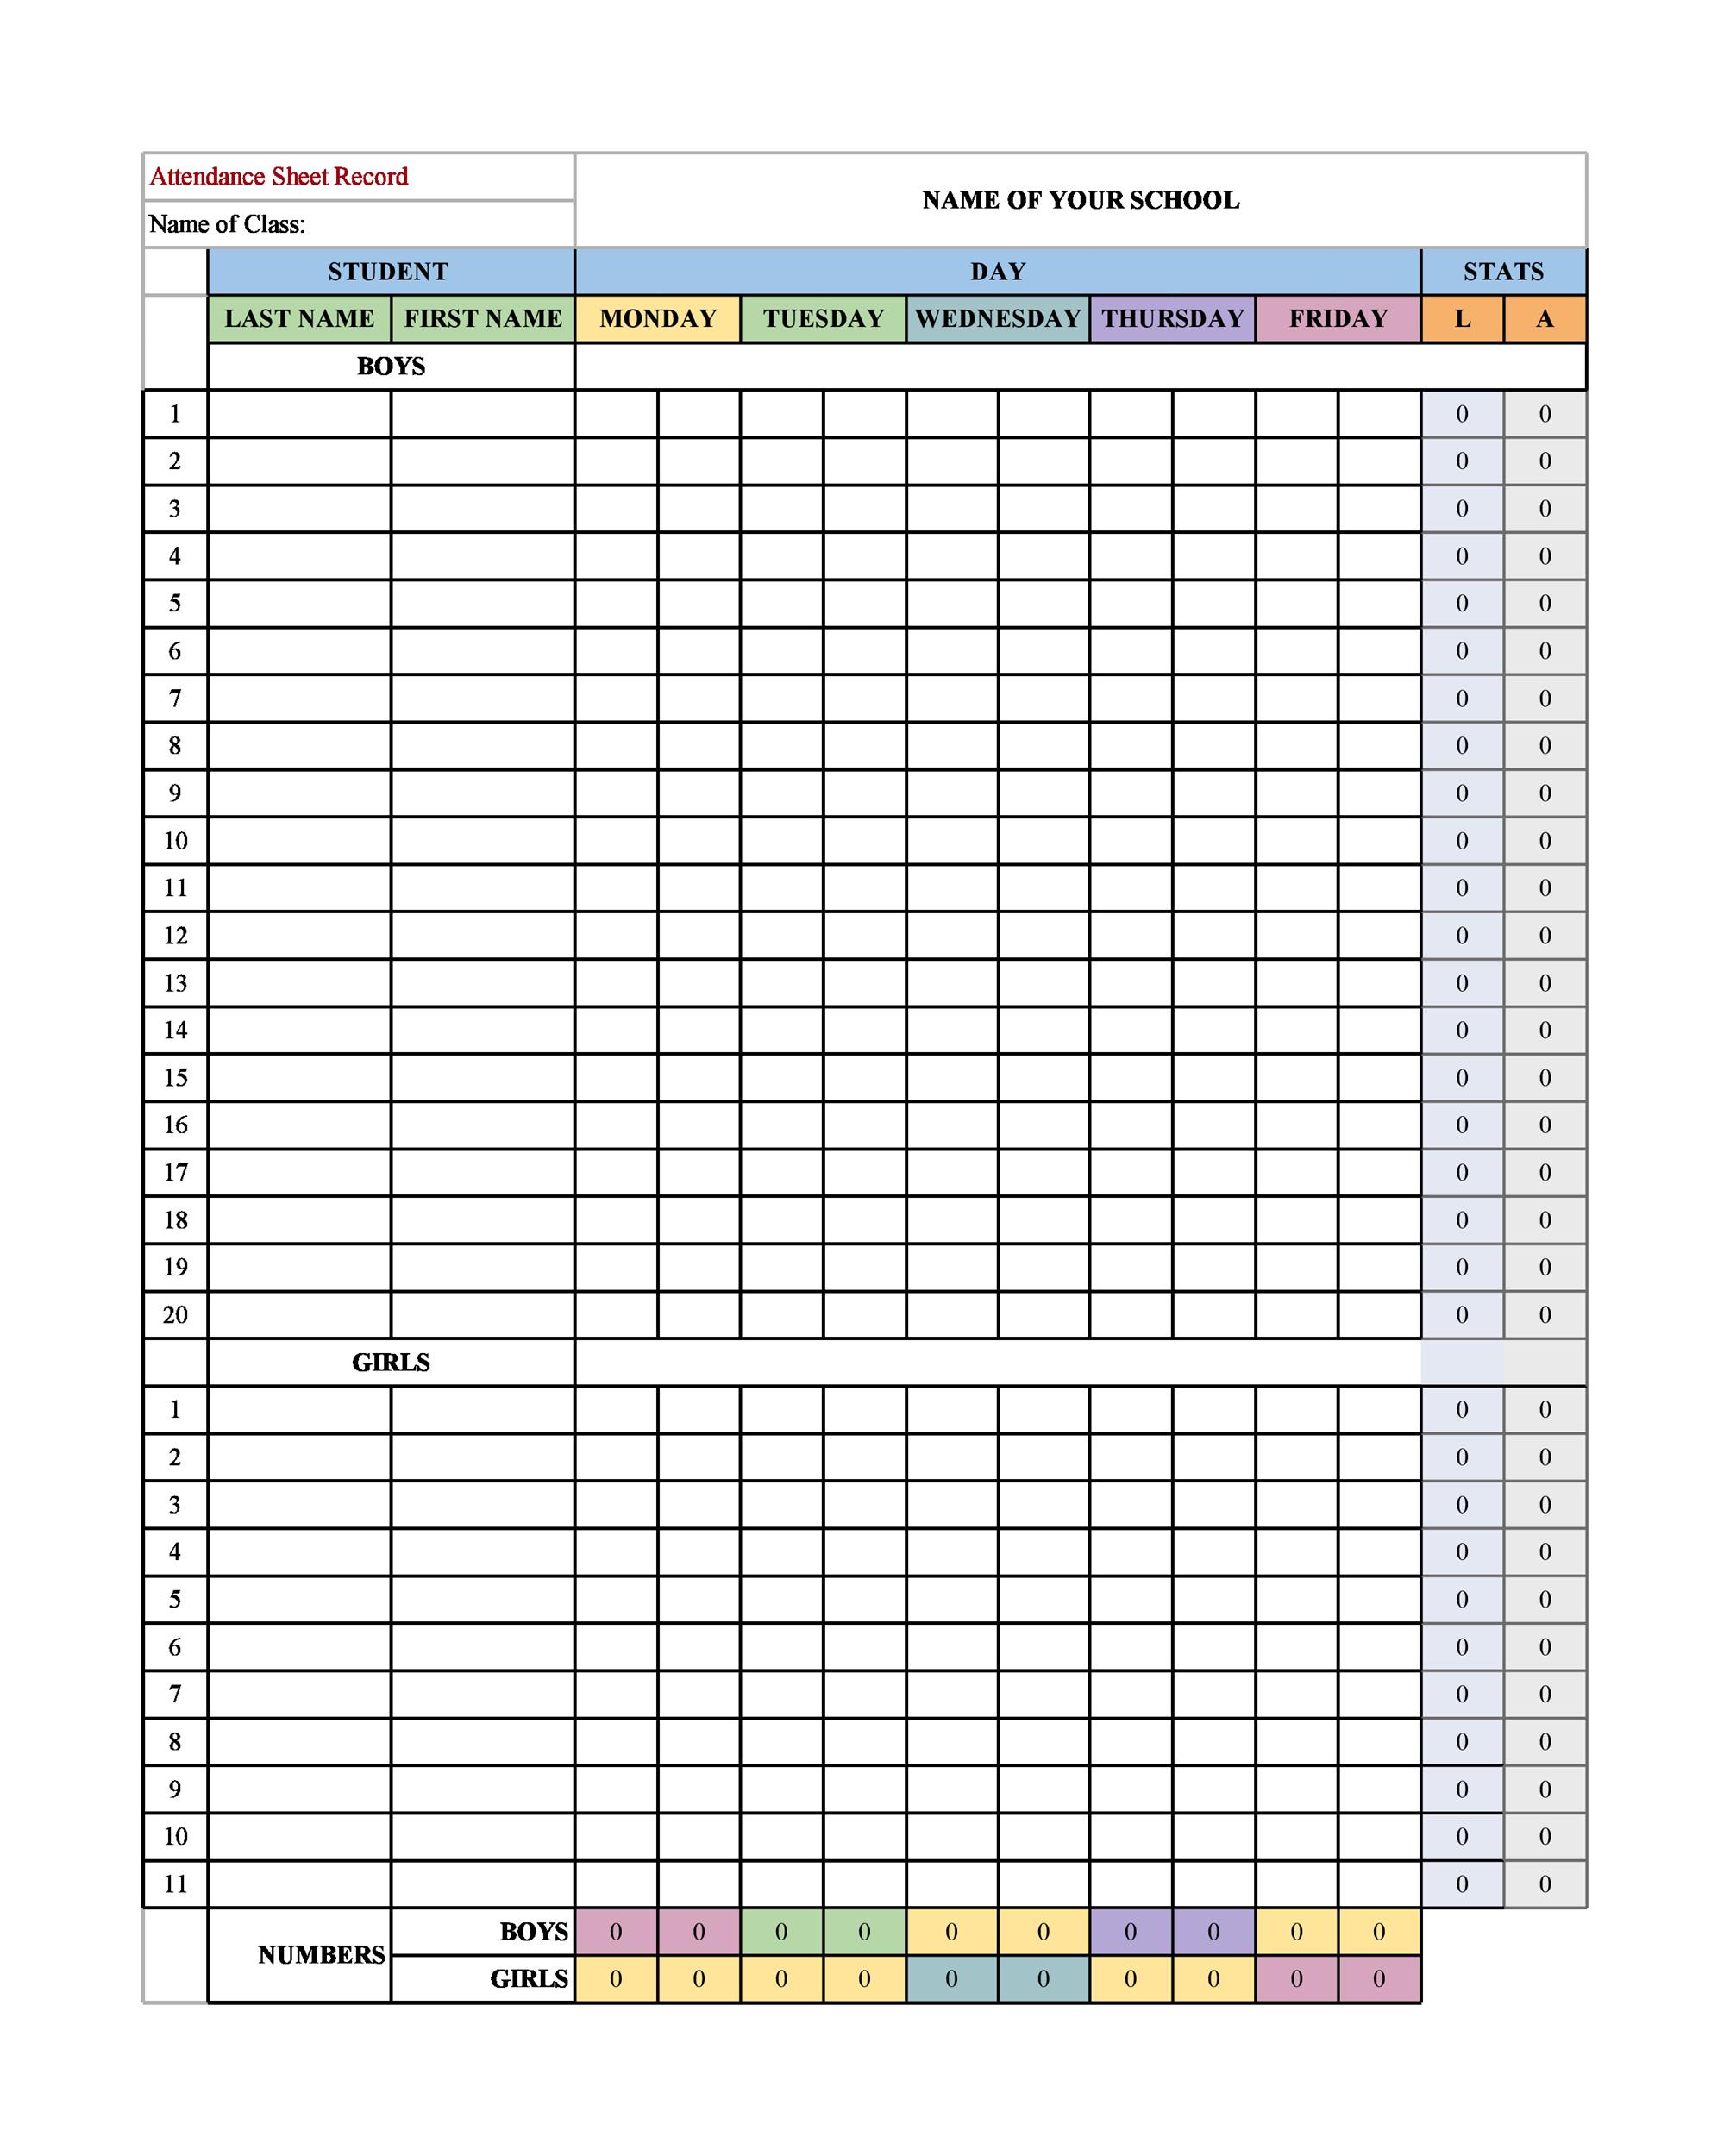 employee-attendance-record-template-excel